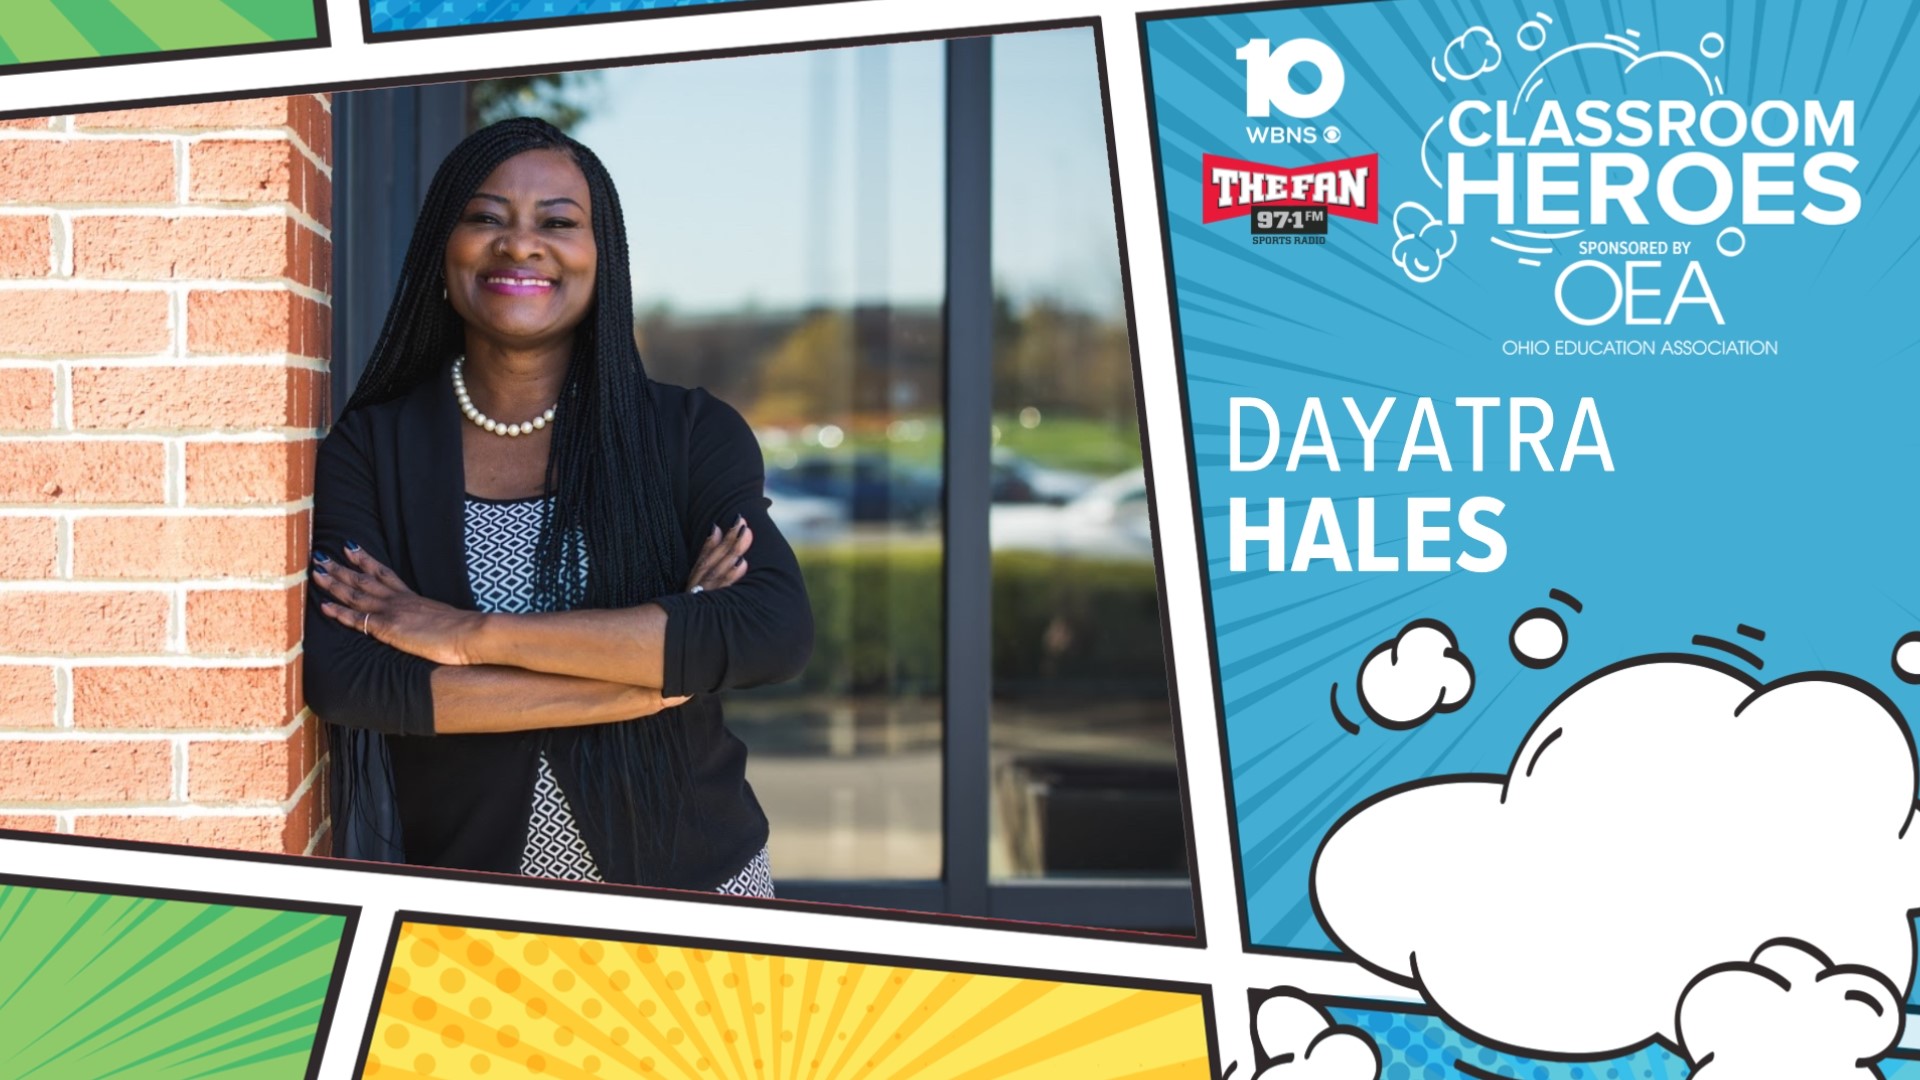 When Dayatra “Coach” Hales was surprised with the news she was being recognized as a Classroom Hero, she was certainly surprised.